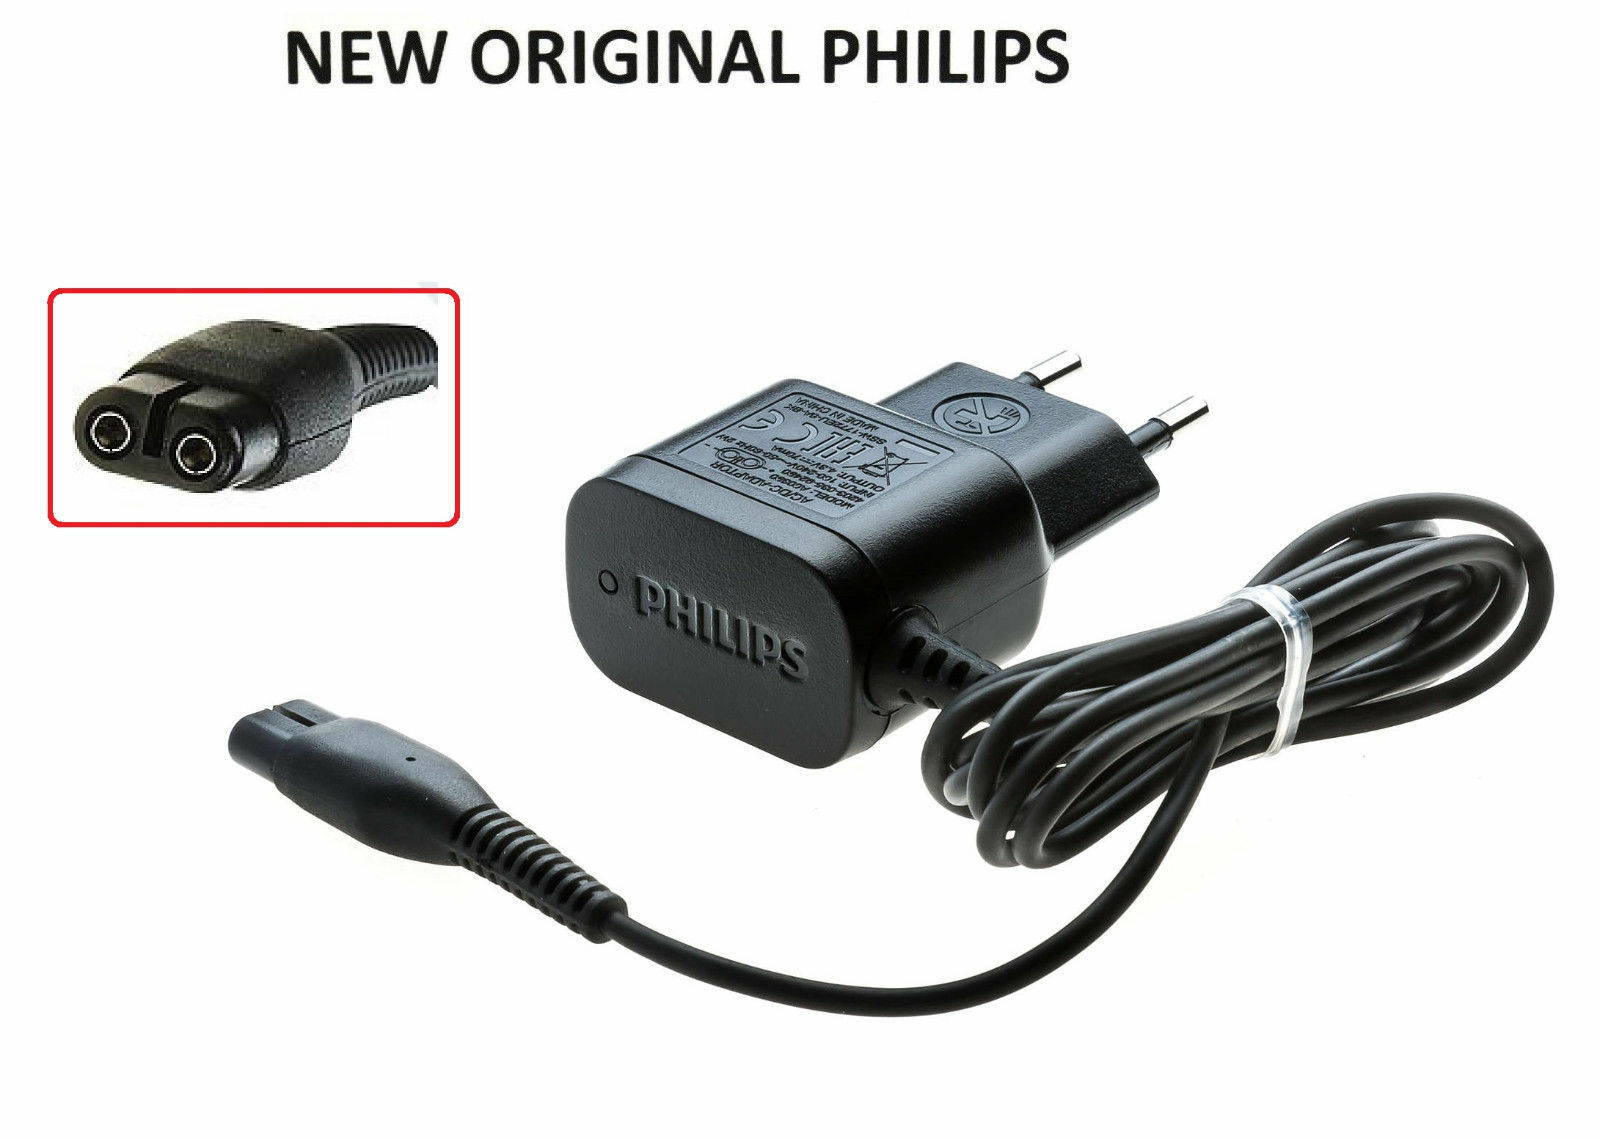 Euro Europe Plug AC Charger Supply Power Adapter For Philips Trimmer Shaver MPN: 422203629001 100-240V~ 50/60Hz 2W 4 - Click Image to Close